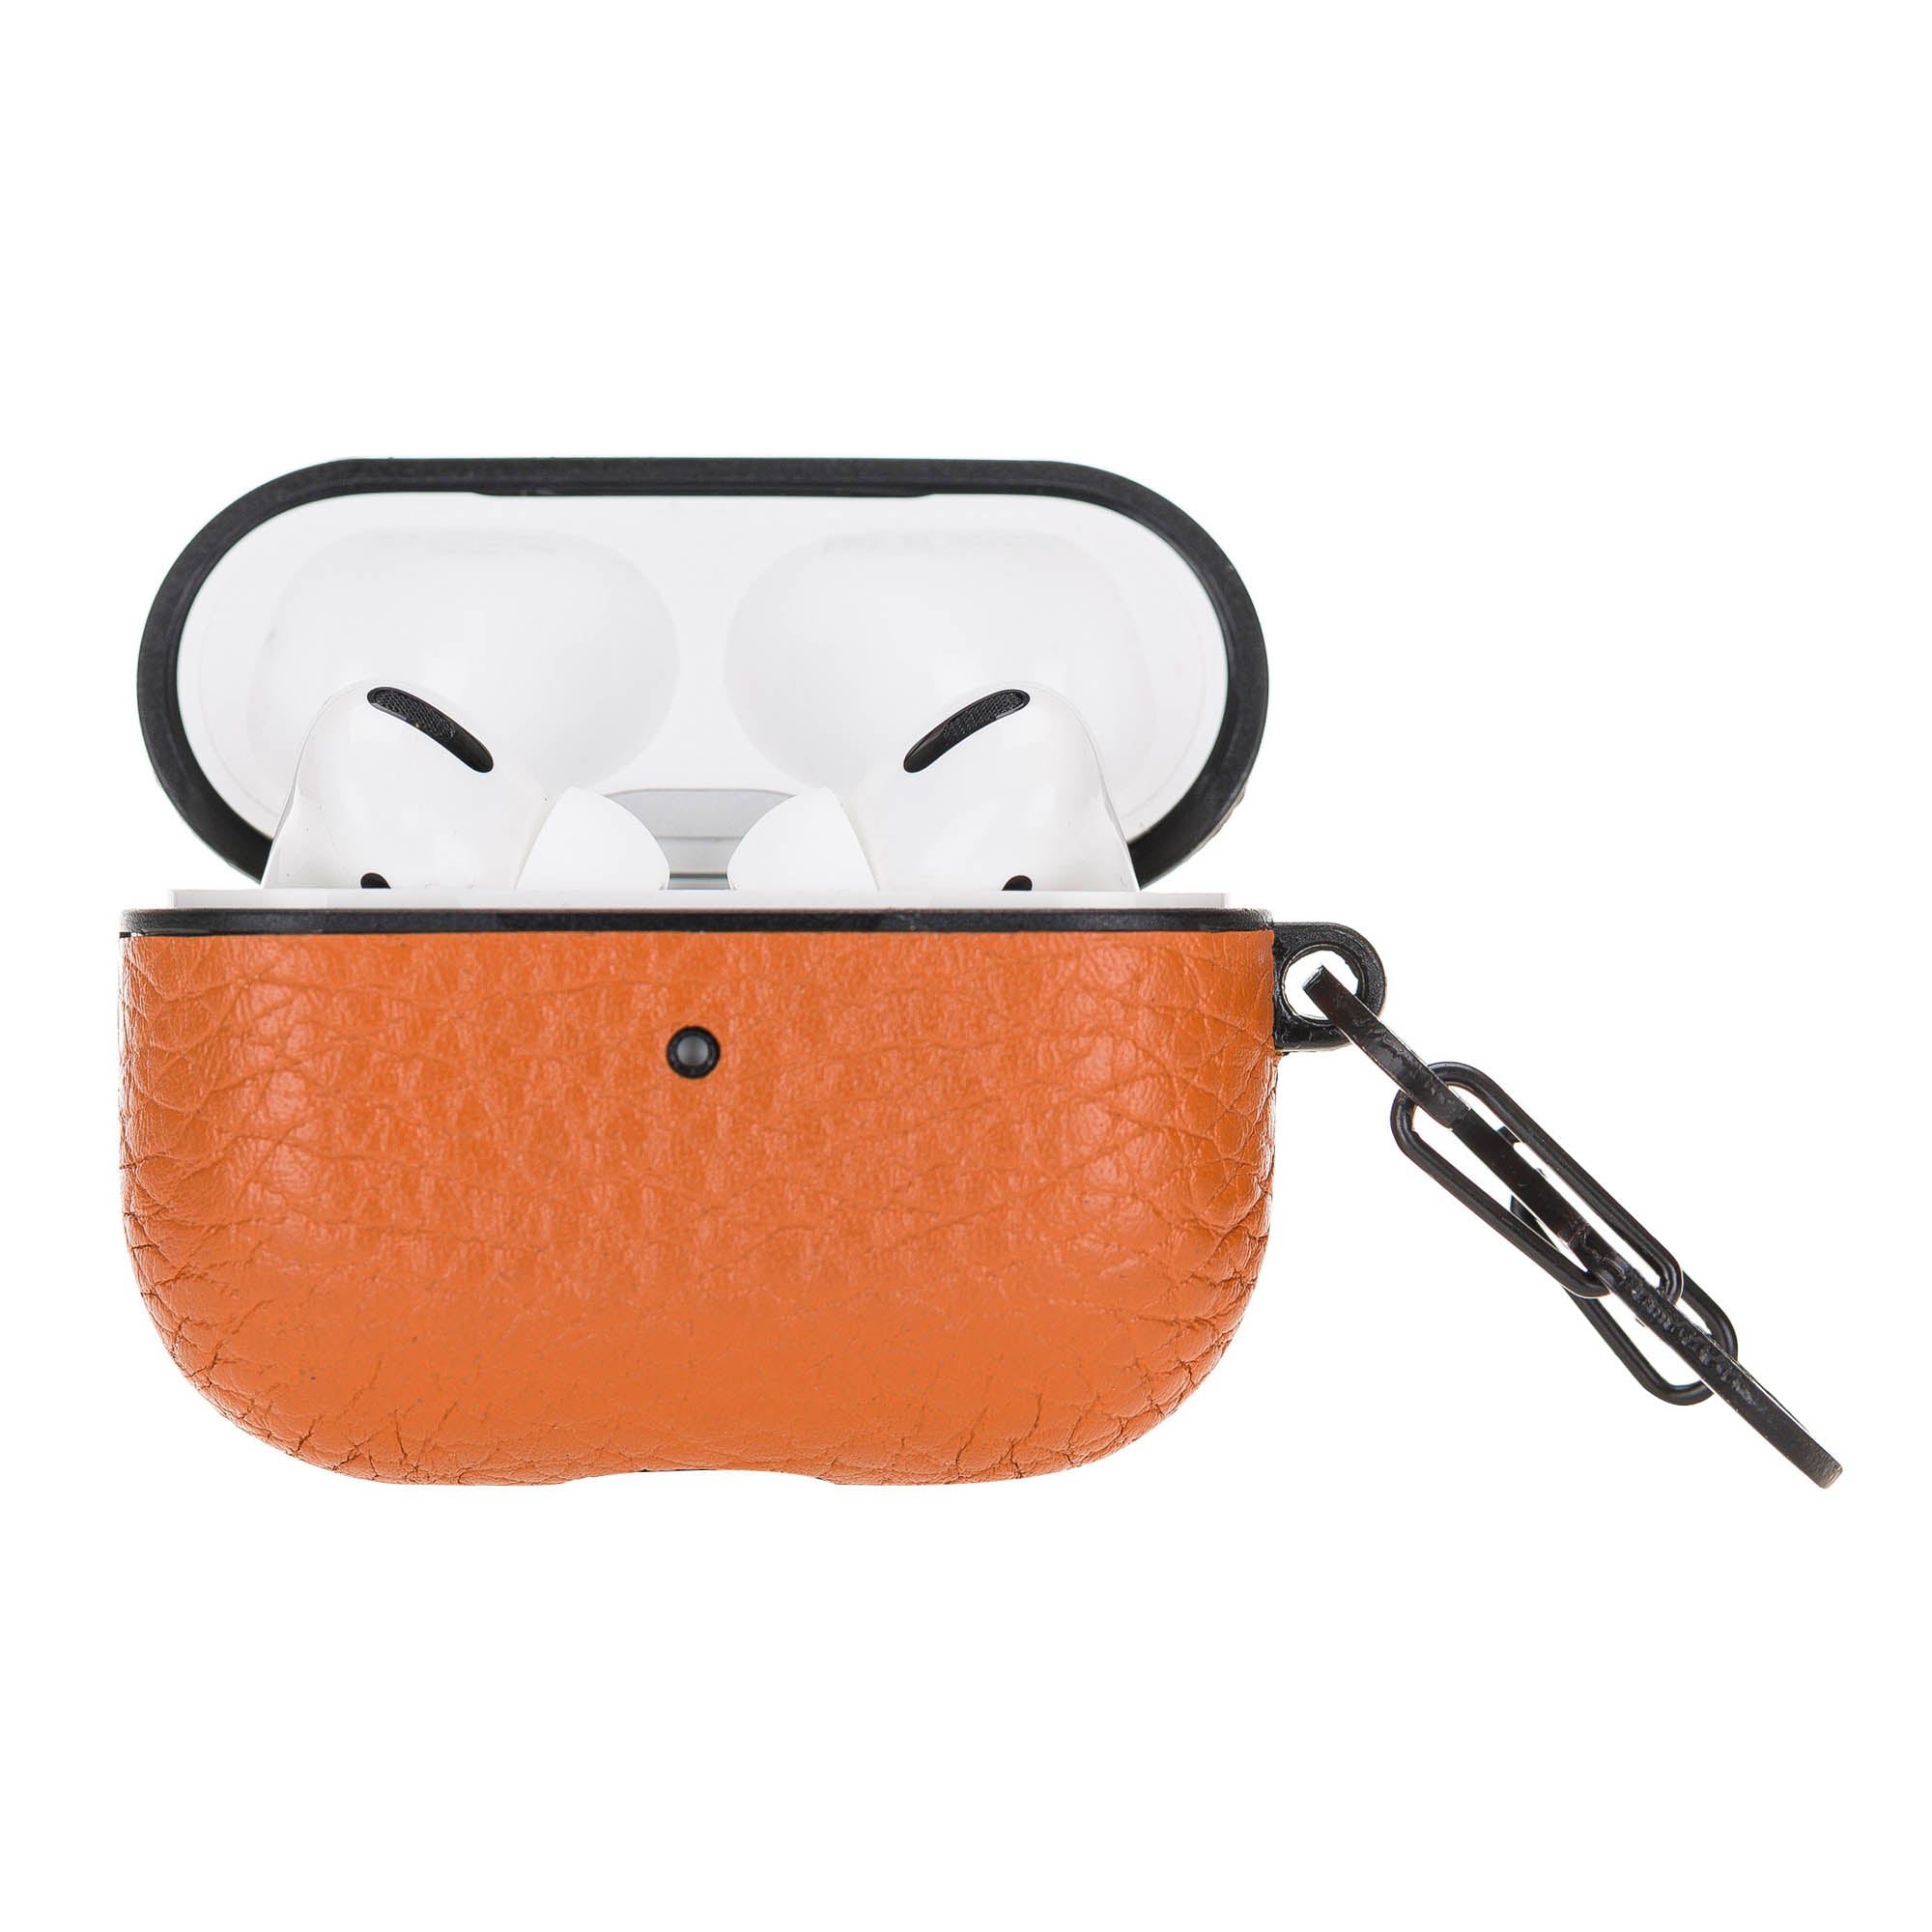 Juni Leather Capsule Case for AirPods Pro - ORANGE - saracleather